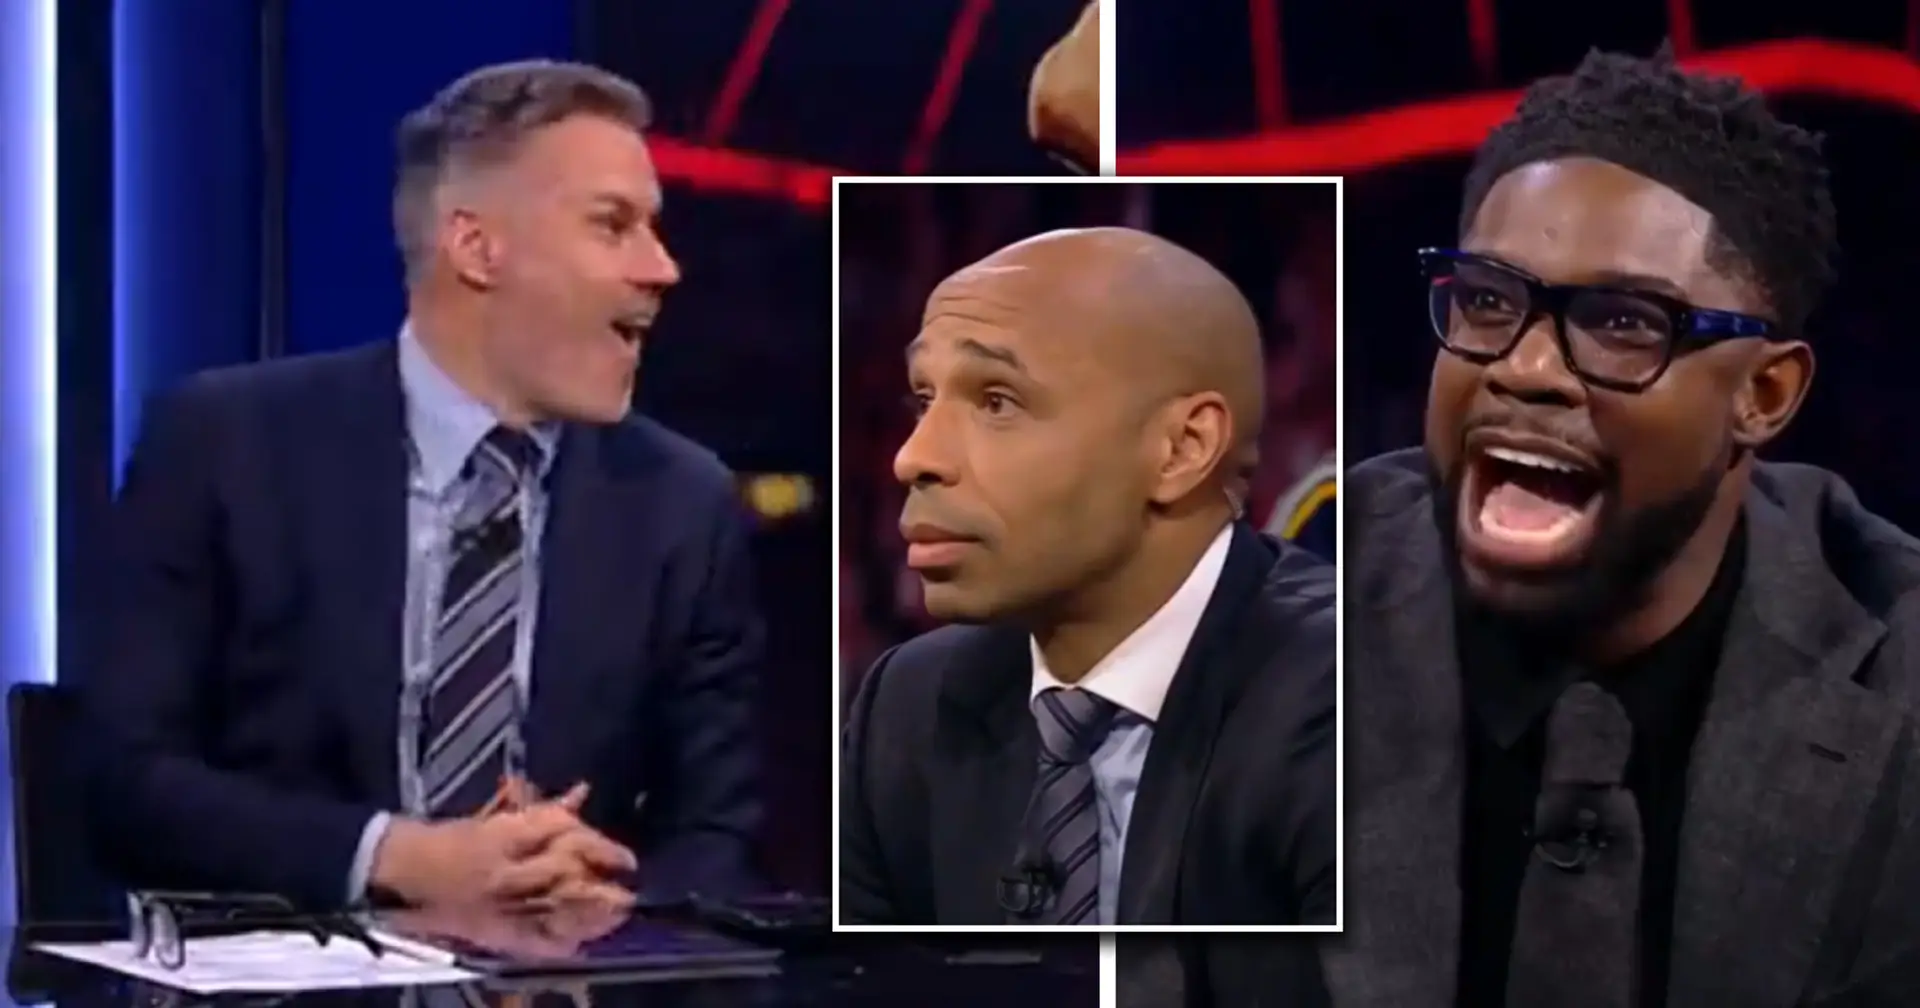 Thierry Henry 'puts Carragher to his lane' after the joke about him